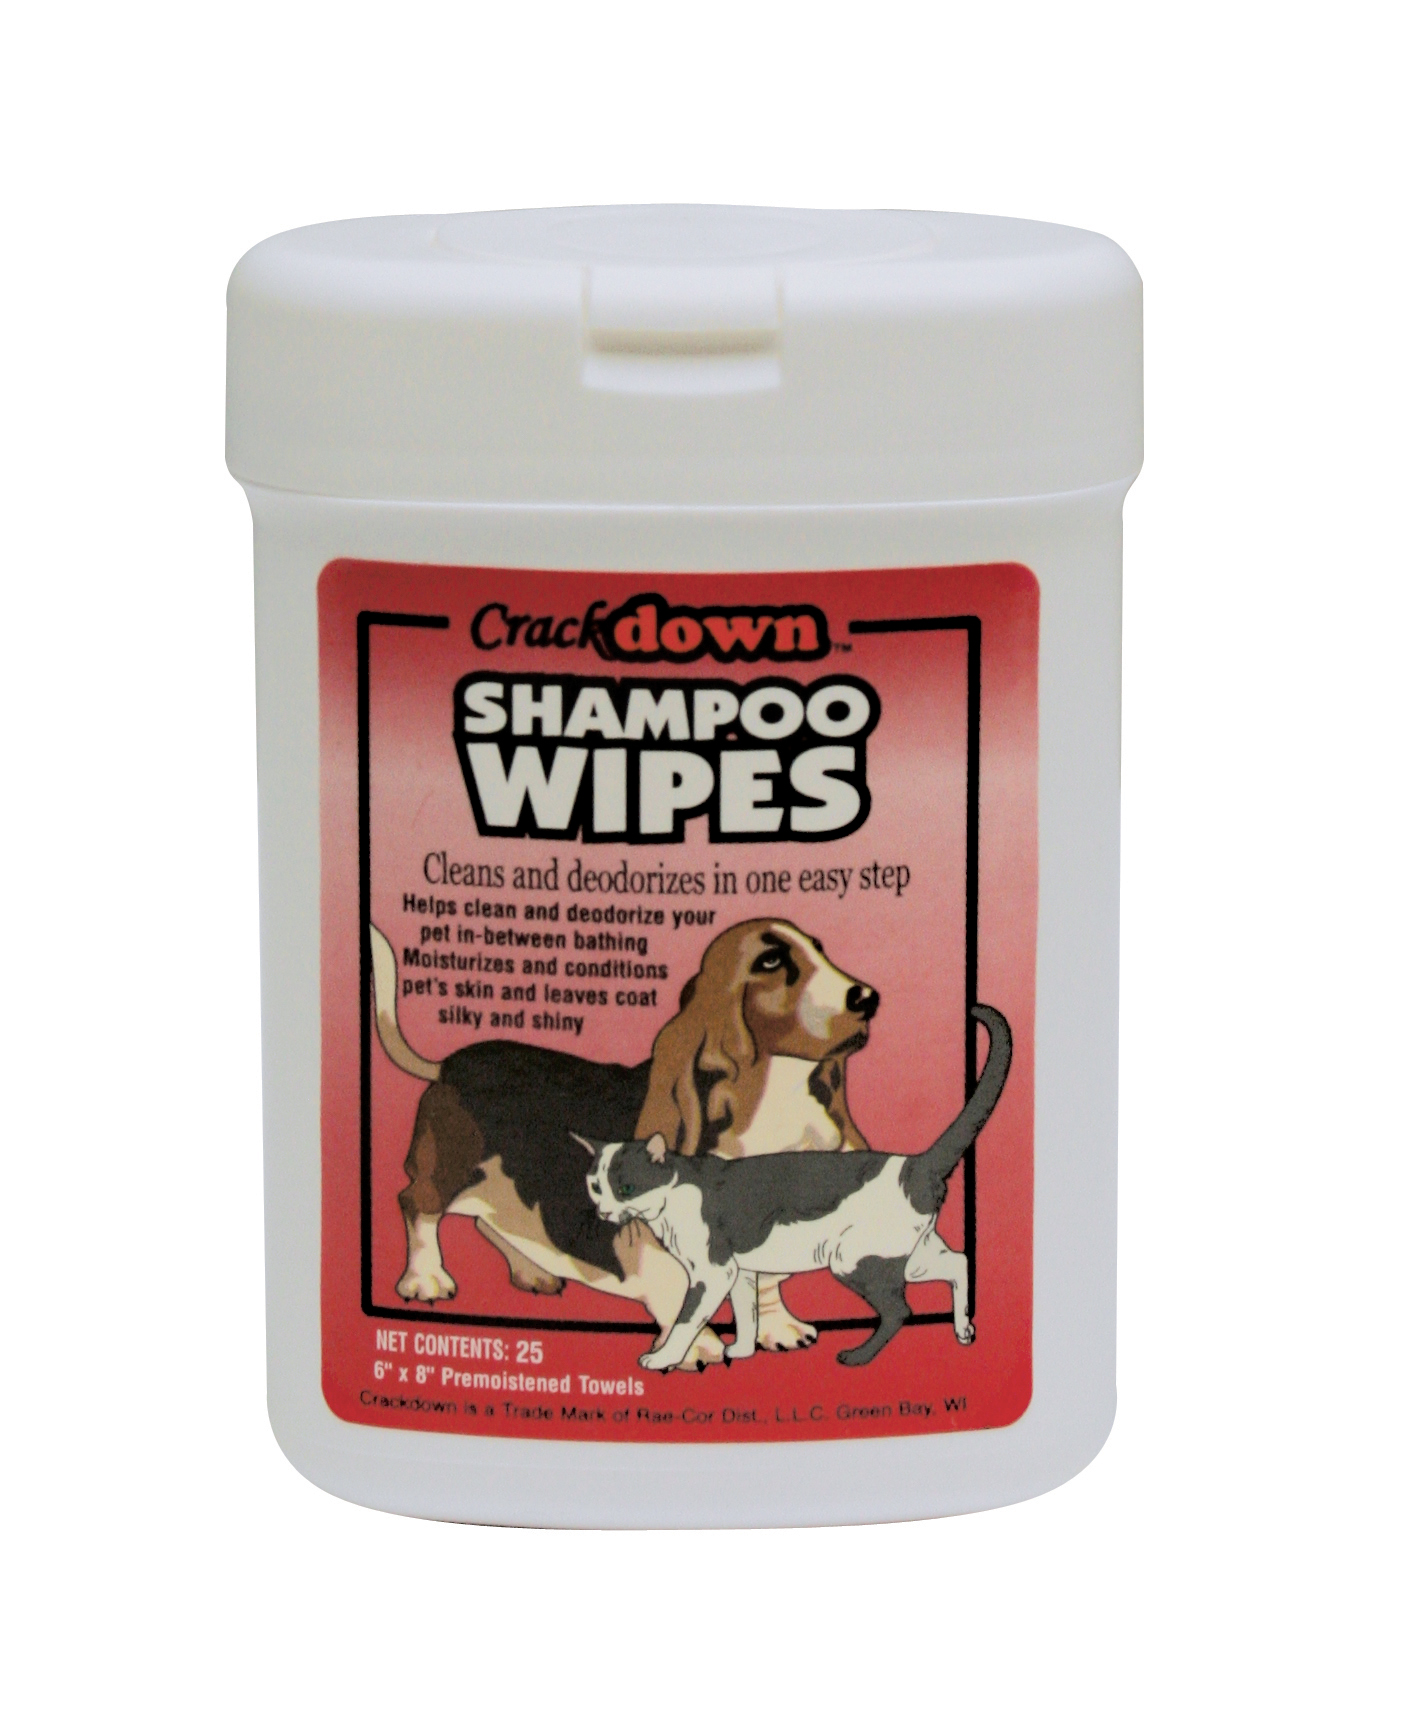 SHAMPOO WIPES - 25 COUNT
CANISTER